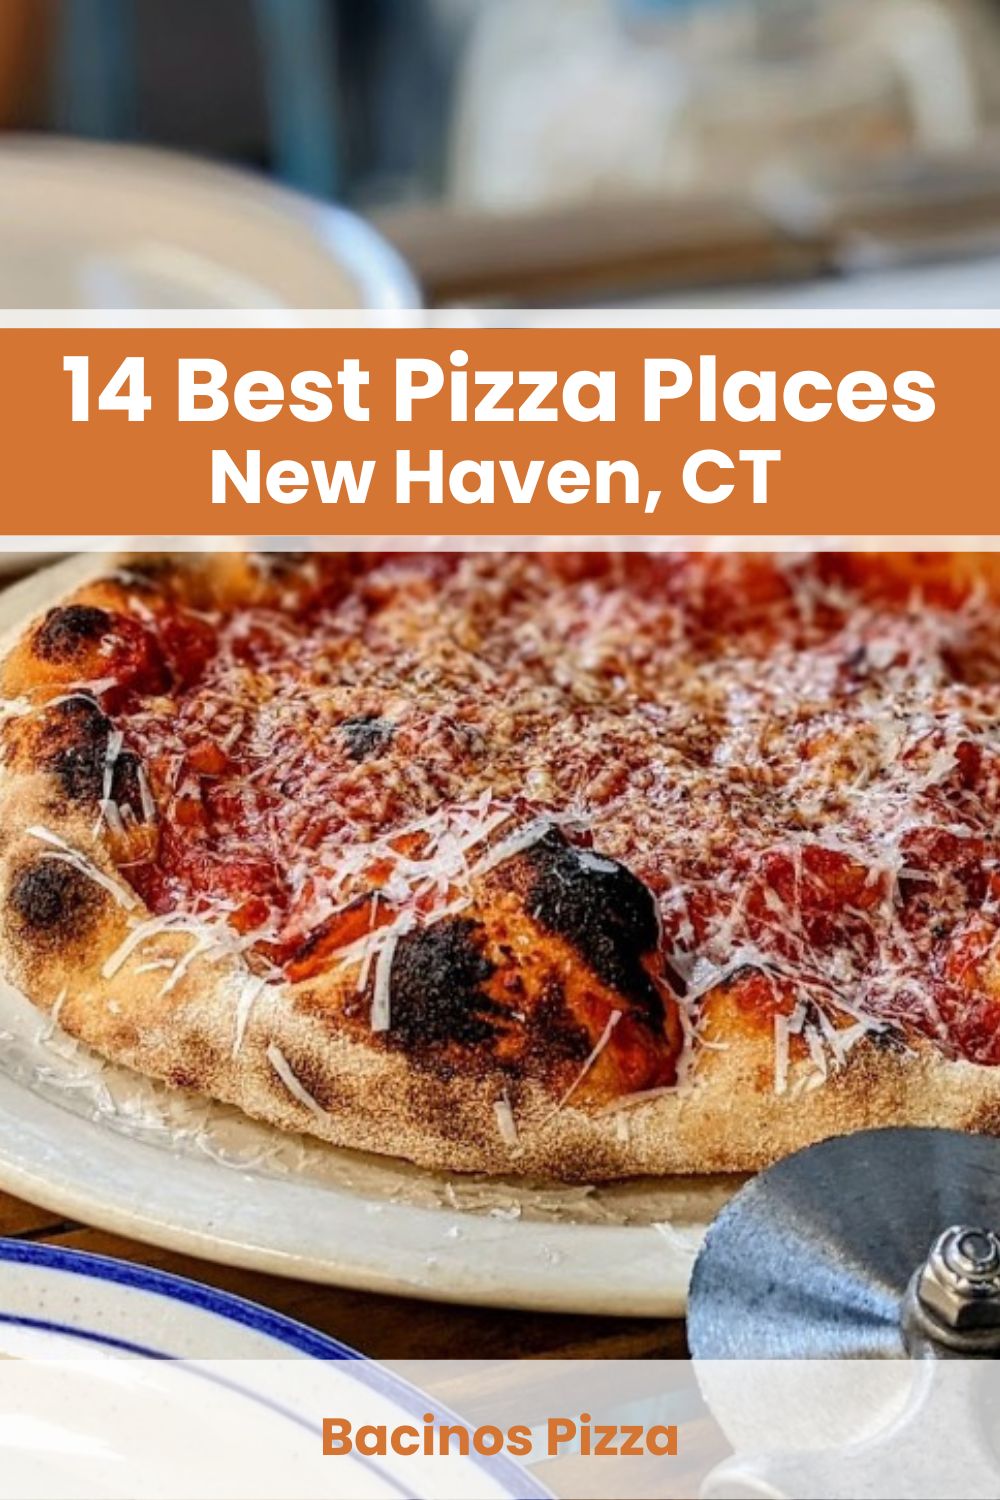 Pizza Place in New Haven